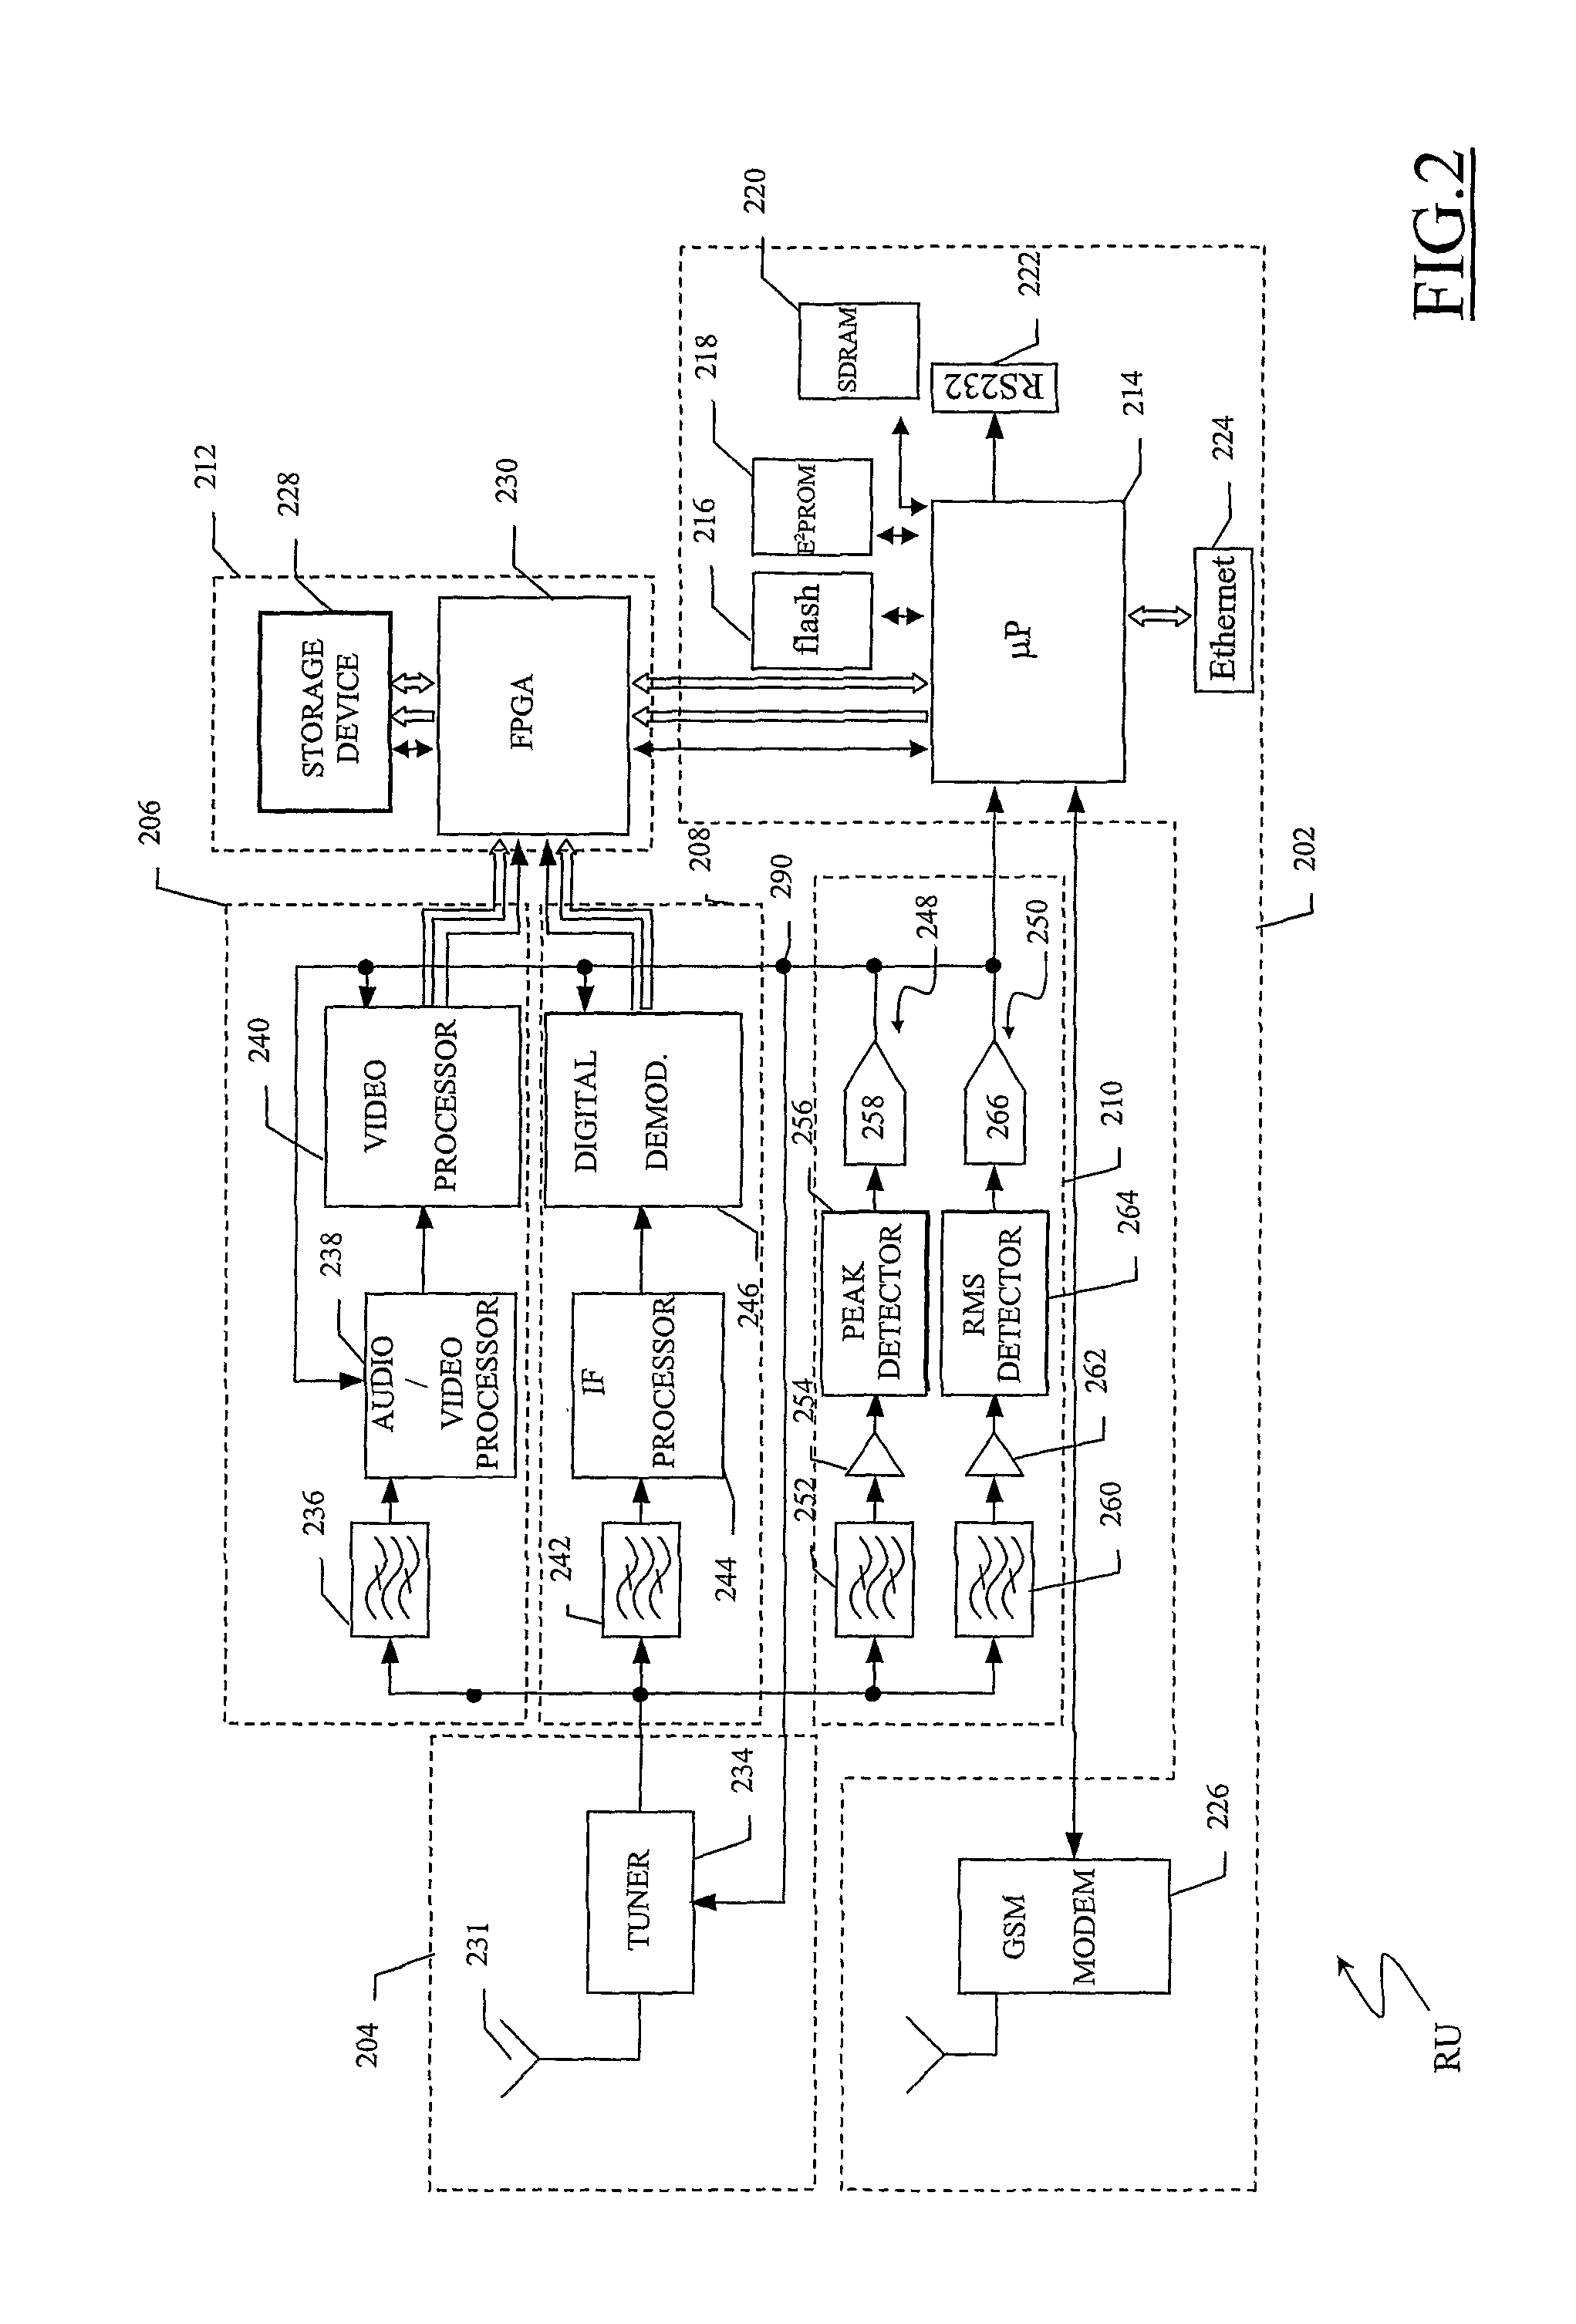 Monitoring system for monitoring coverage of broadcast transmissions